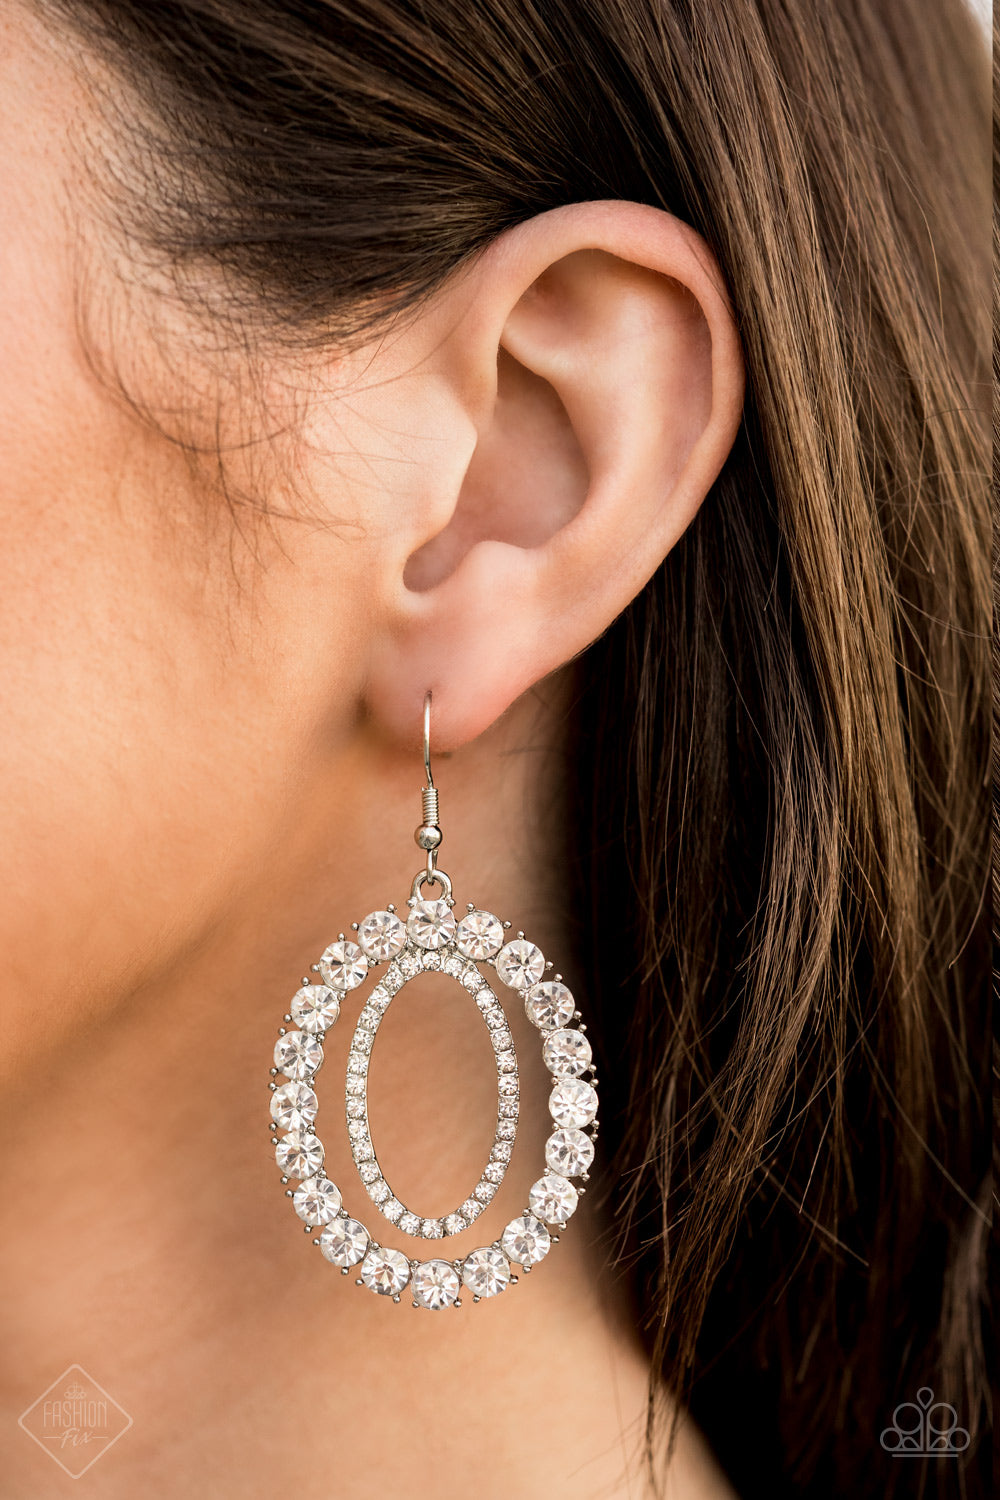 Paparazzi Accessories - Deluxe Luxury - White (Bling) Earrings